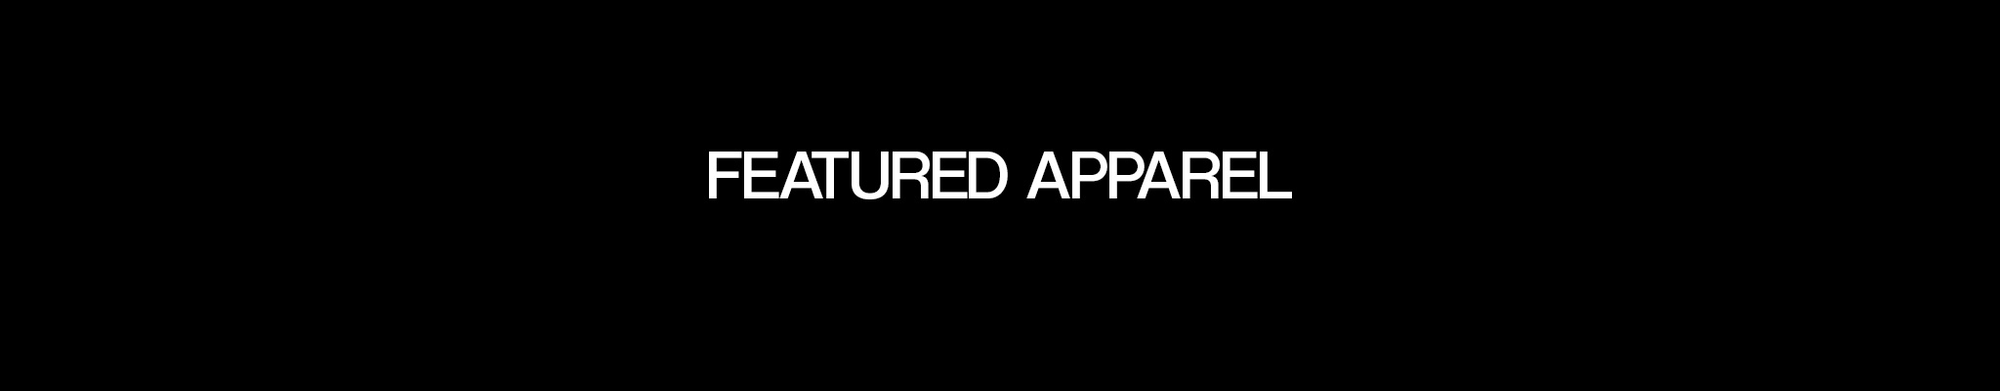 APPAREL - FEATURED